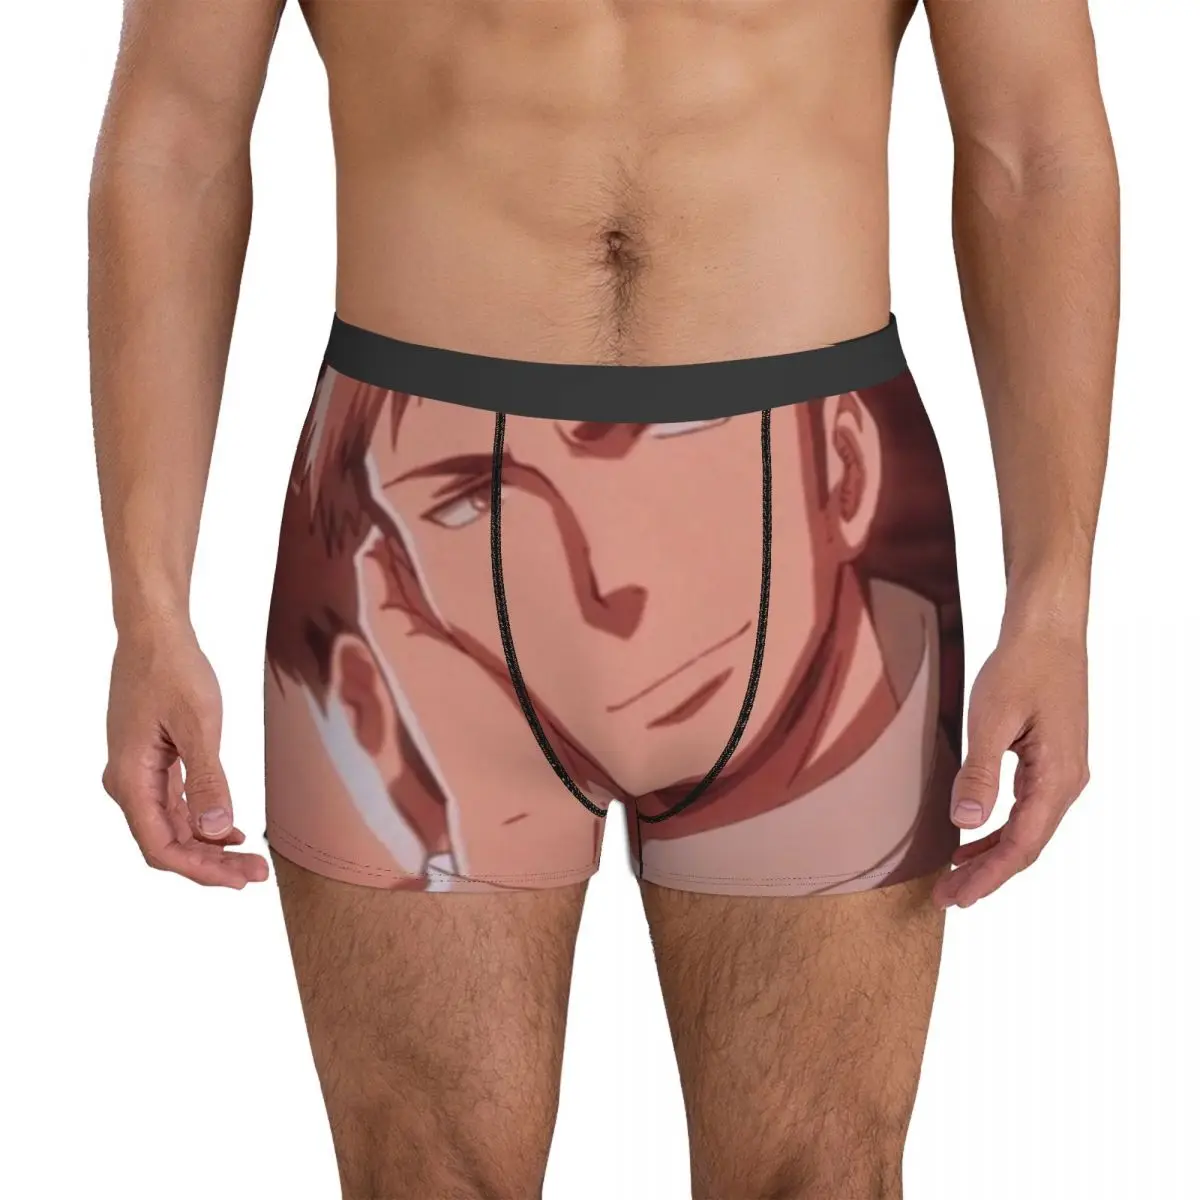 Jean Kirstein Color Swatch Underwear Japan anime attack on titan Printing Boxer Shorts Hot Men's Underpants Breathable Shorts